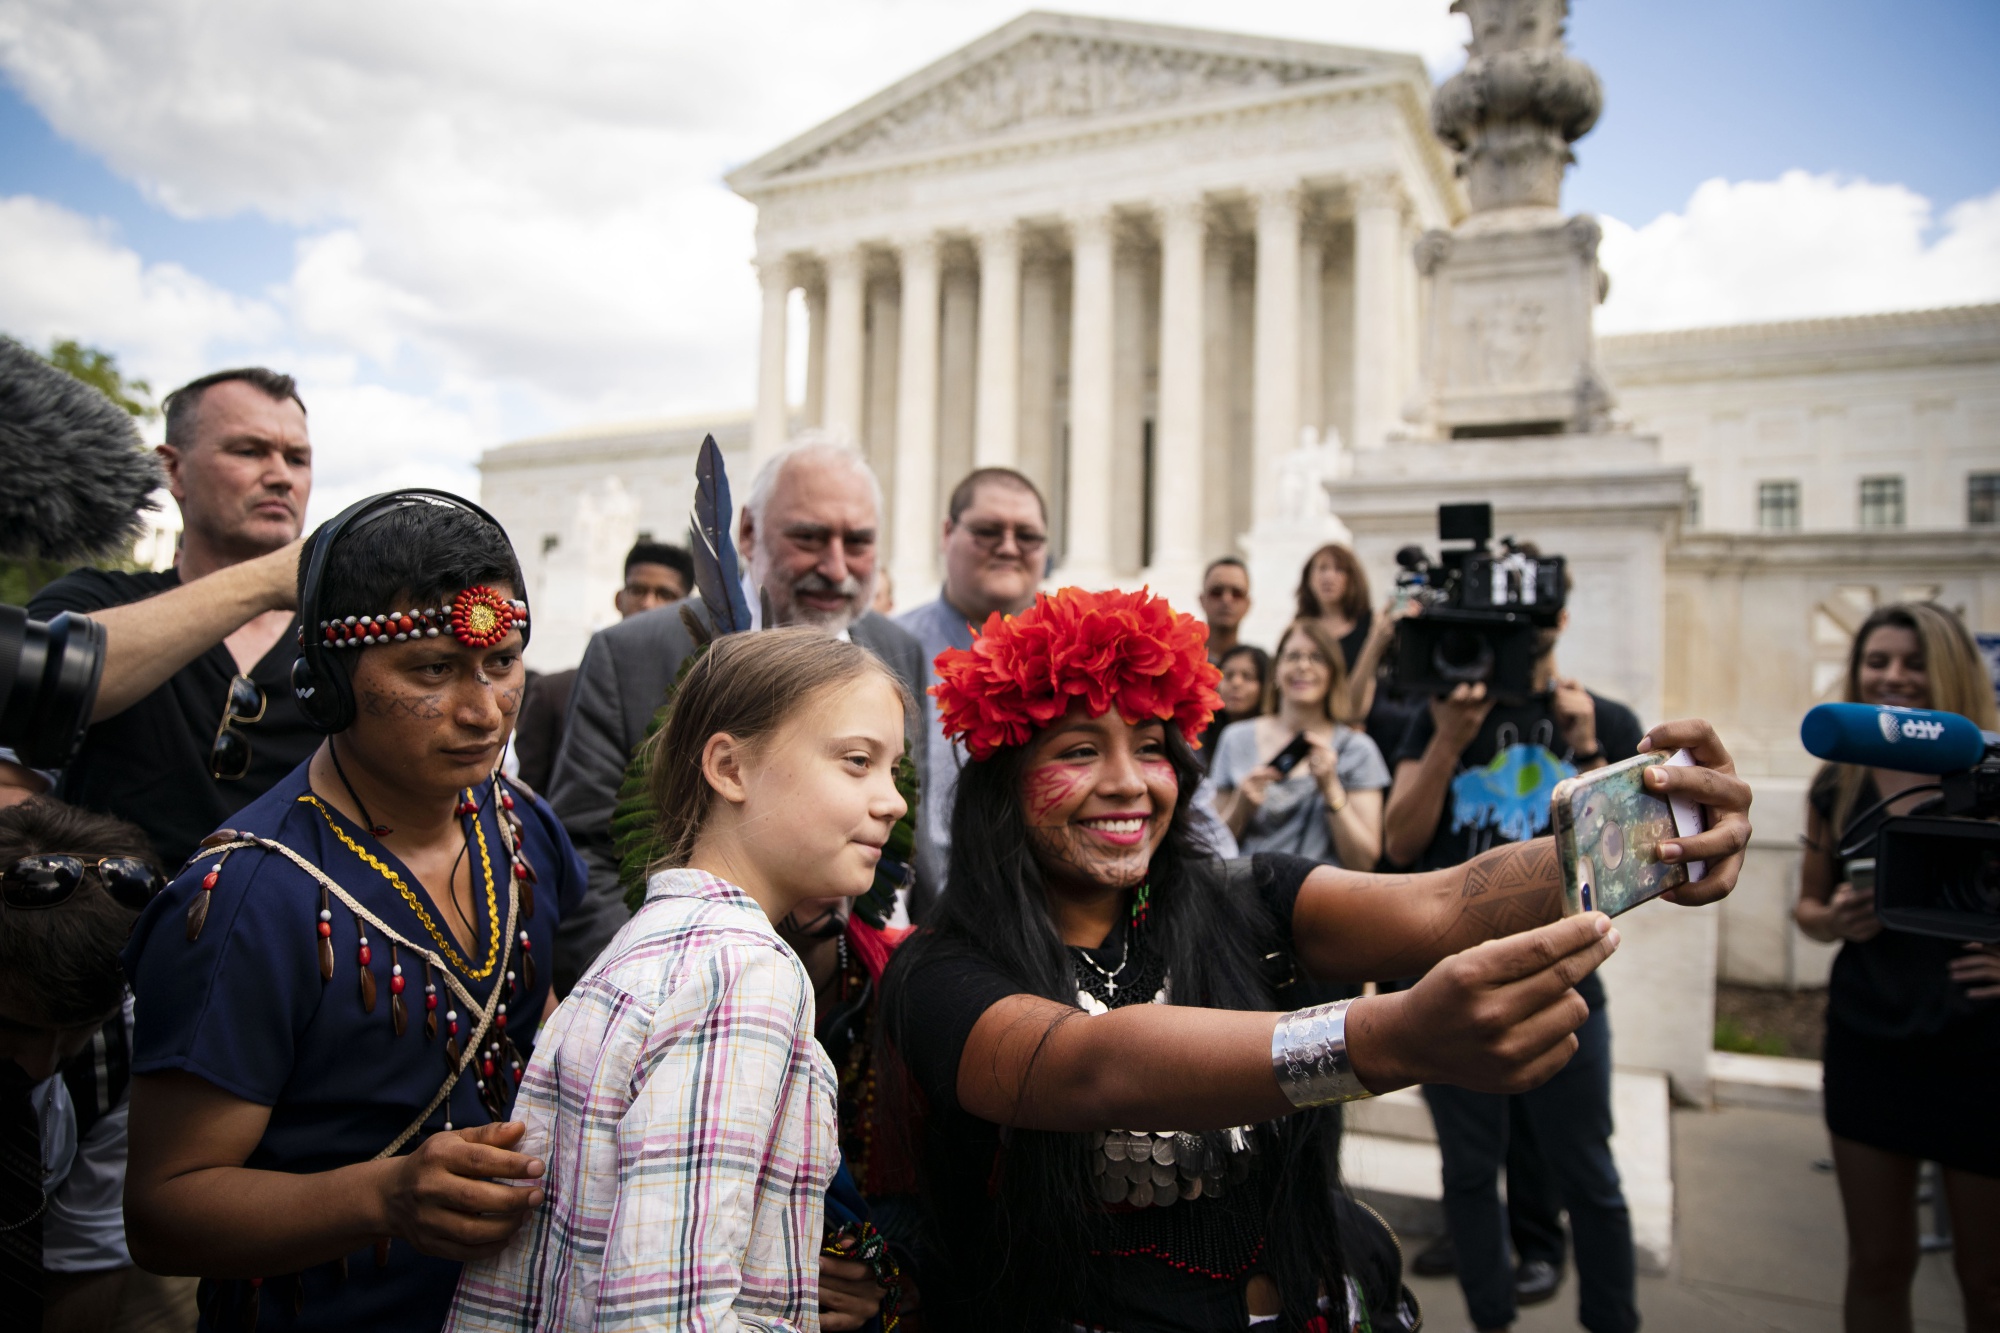 Militza Flaco, a climate activist from Panama, right, uses a mobile device to take a 'selfie' photograph with Swedish activist Greta Thunberg, center, outside the Supreme Court in Washington, D.C., U.S., on Wednesday, Sept. 18, 2019.